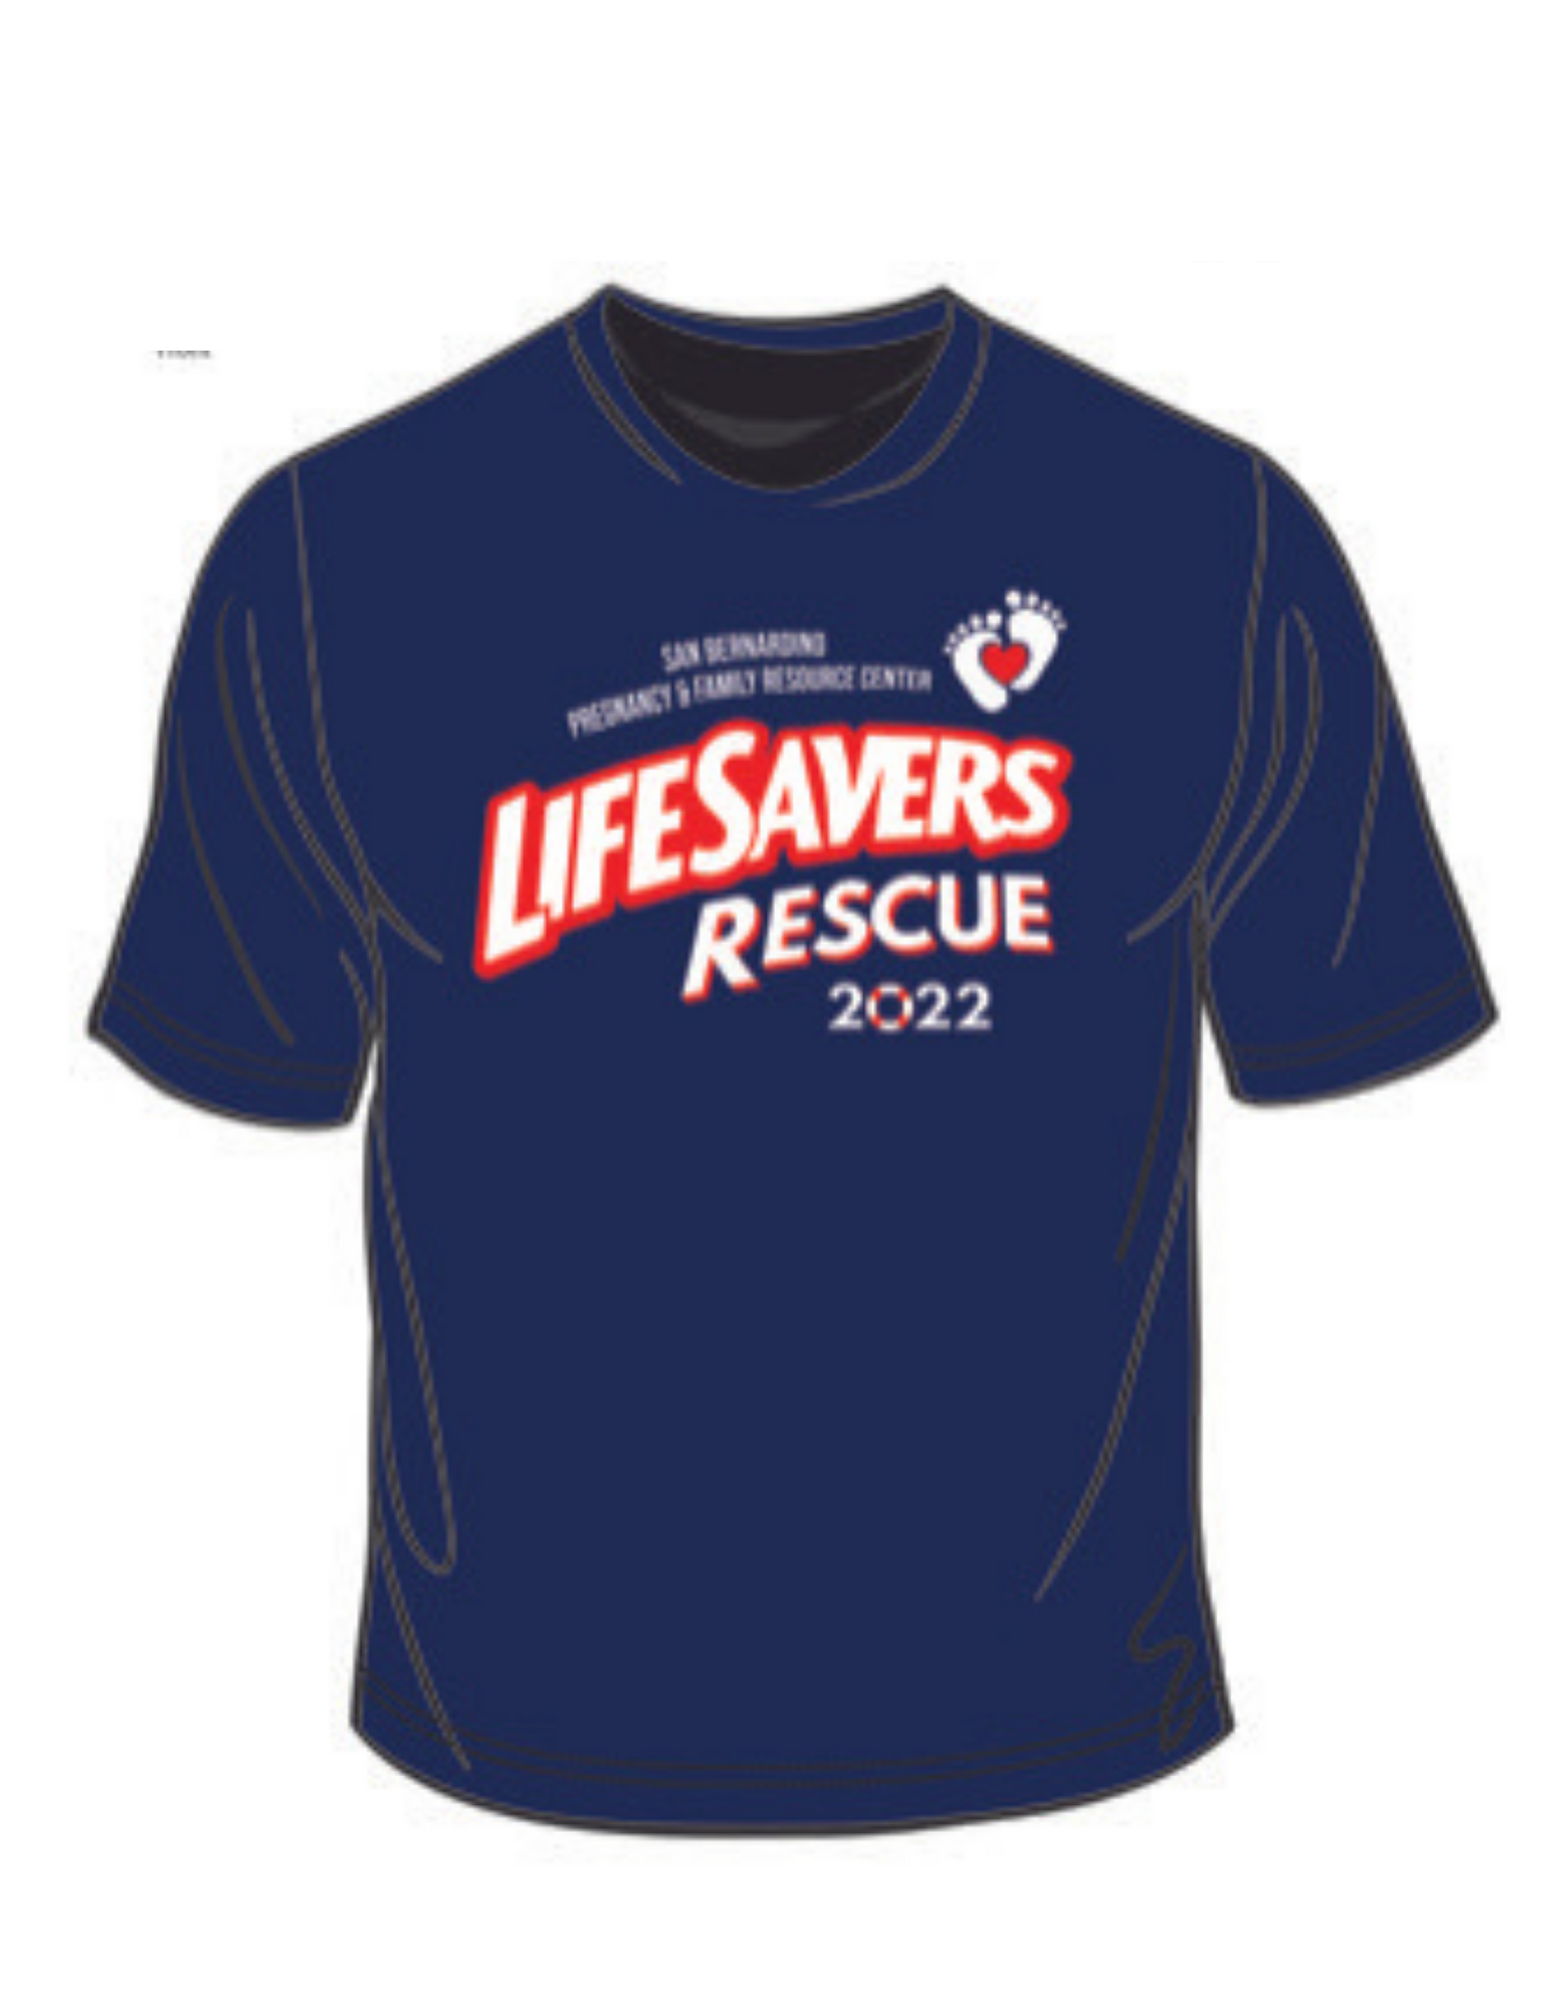 Click here to donate to LifeSavers Rescue 2022